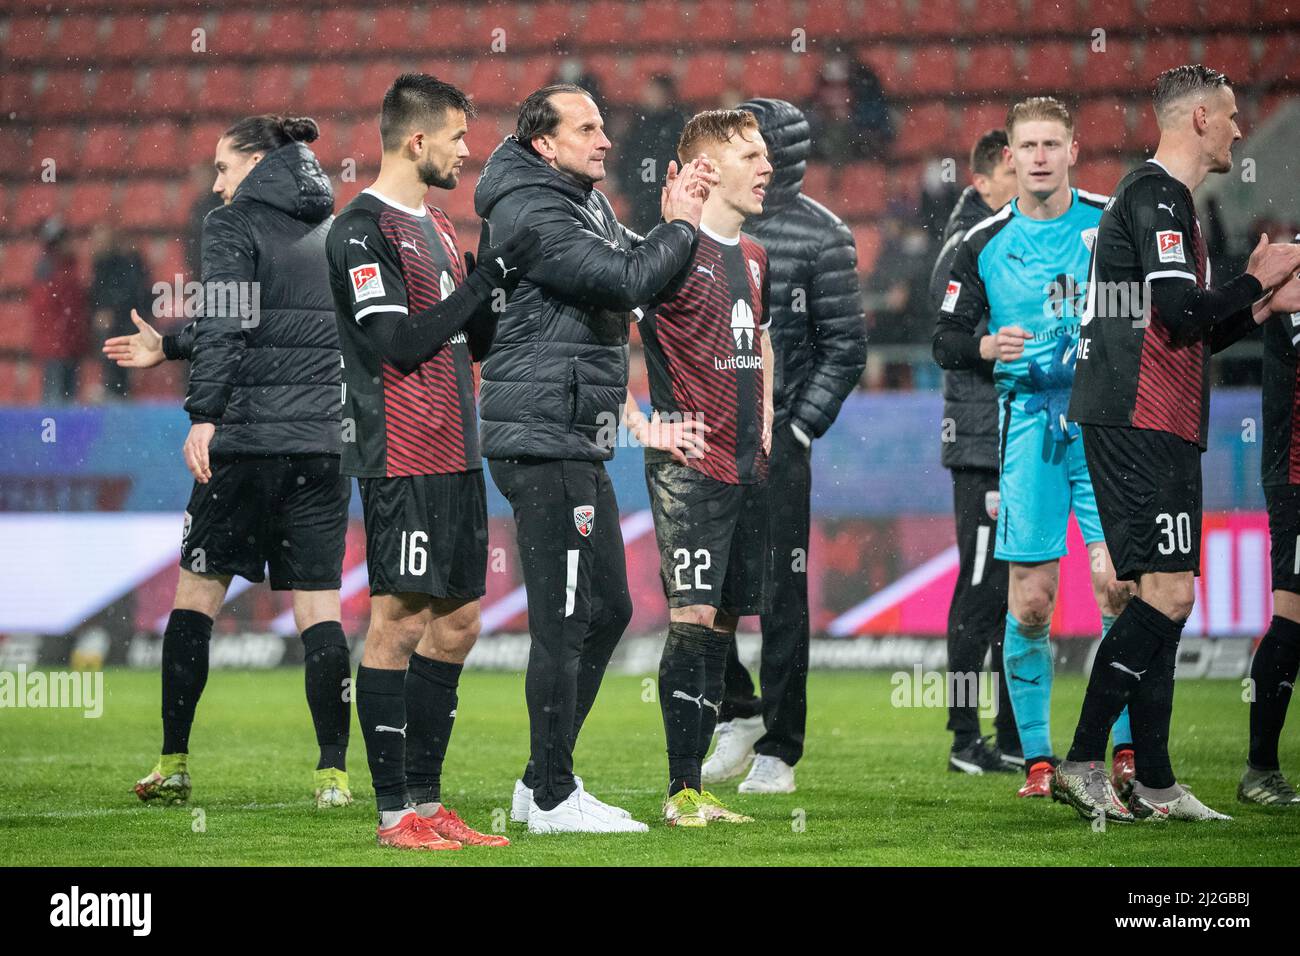 Ingolstadt, Germany. 01st Apr, 2022. Soccer: 2nd Bundesliga, FC Ingolstadt 04 - Erzgebirge Aue, Matchday 28, Audi Sportpark. Ingolstadt coach Rüdiger Rehm (2nd from left) celebrates with fans after the game. Credit: Matthias Balk/dpa - IMPORTANT NOTE: In accordance with the requirements of the DFL Deutsche Fußball Liga and the DFB Deutscher Fußball-Bund, it is prohibited to use or have used photographs taken in the stadium and/or of the match in the form of sequence pictures and/or video-like photo series./dpa/Alamy Live News Stock Photo